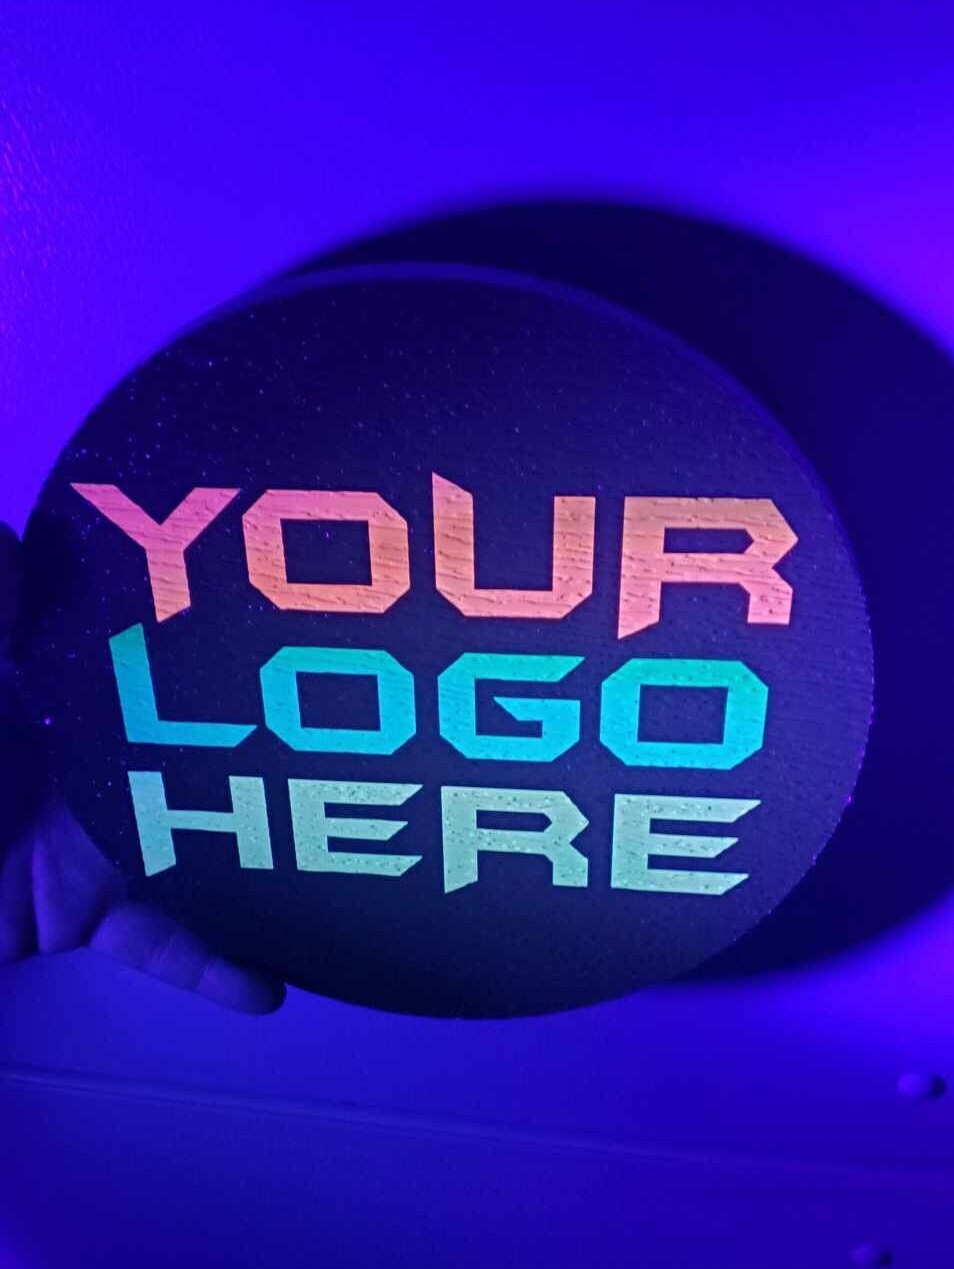 Laser Tag Putt Putt Golf Night Club Custom Personalized Black Light Sign UV Printed Fluorescent Glow Look Your Logo Image Wood Ultraviolet